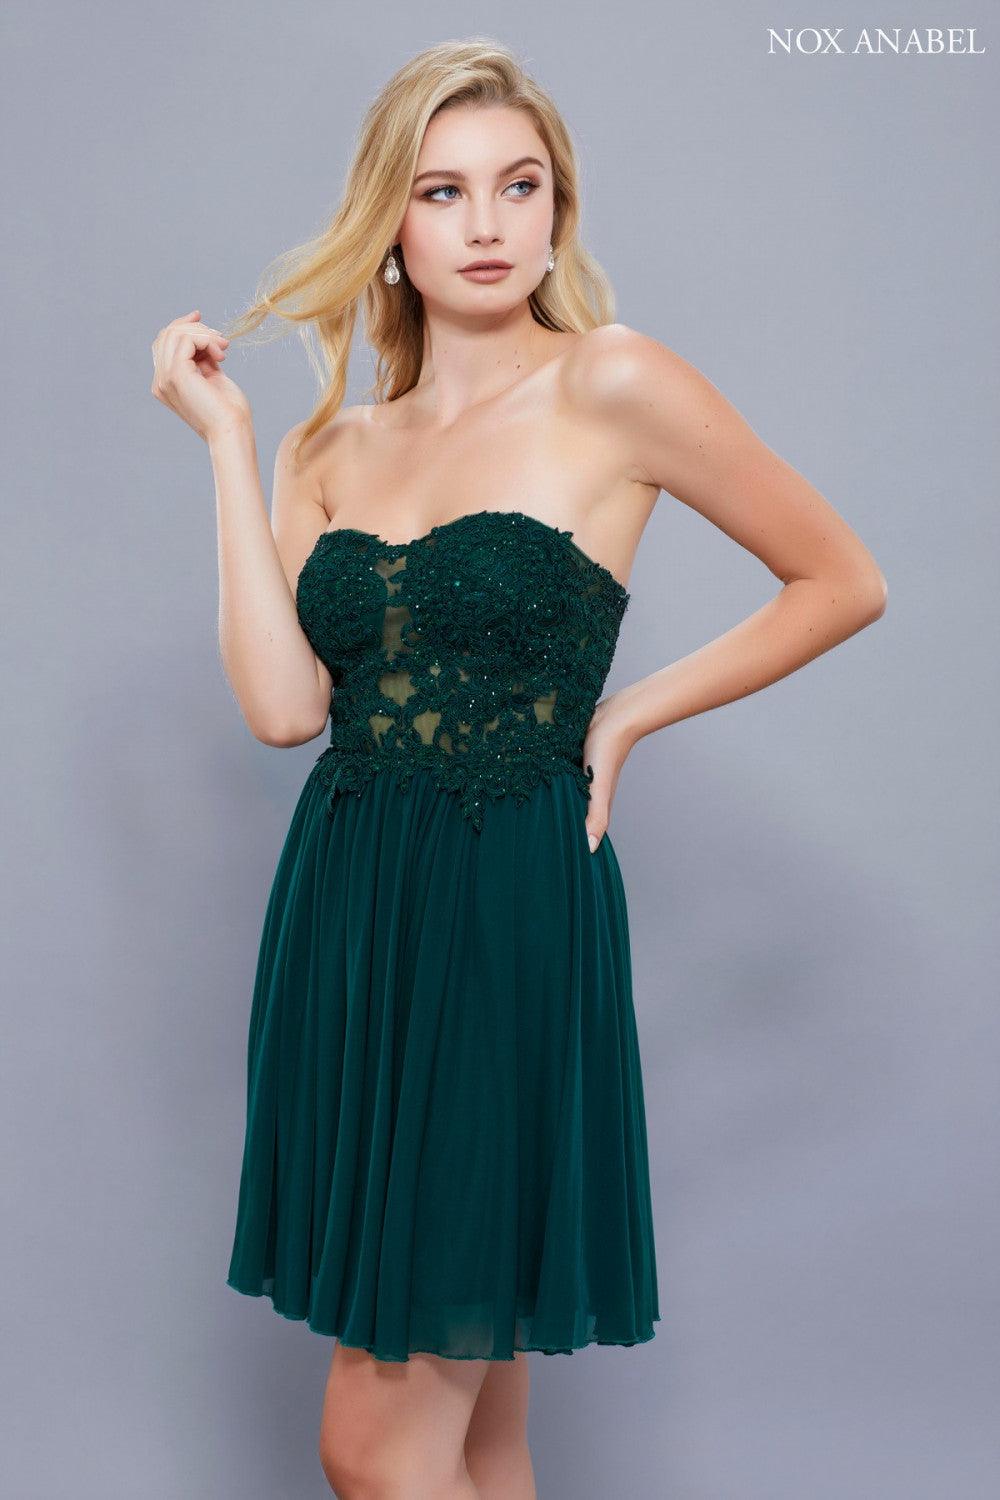 Short Strapless Formal Prom Cocktail Dress - The Dress Outlet Nox Anabel